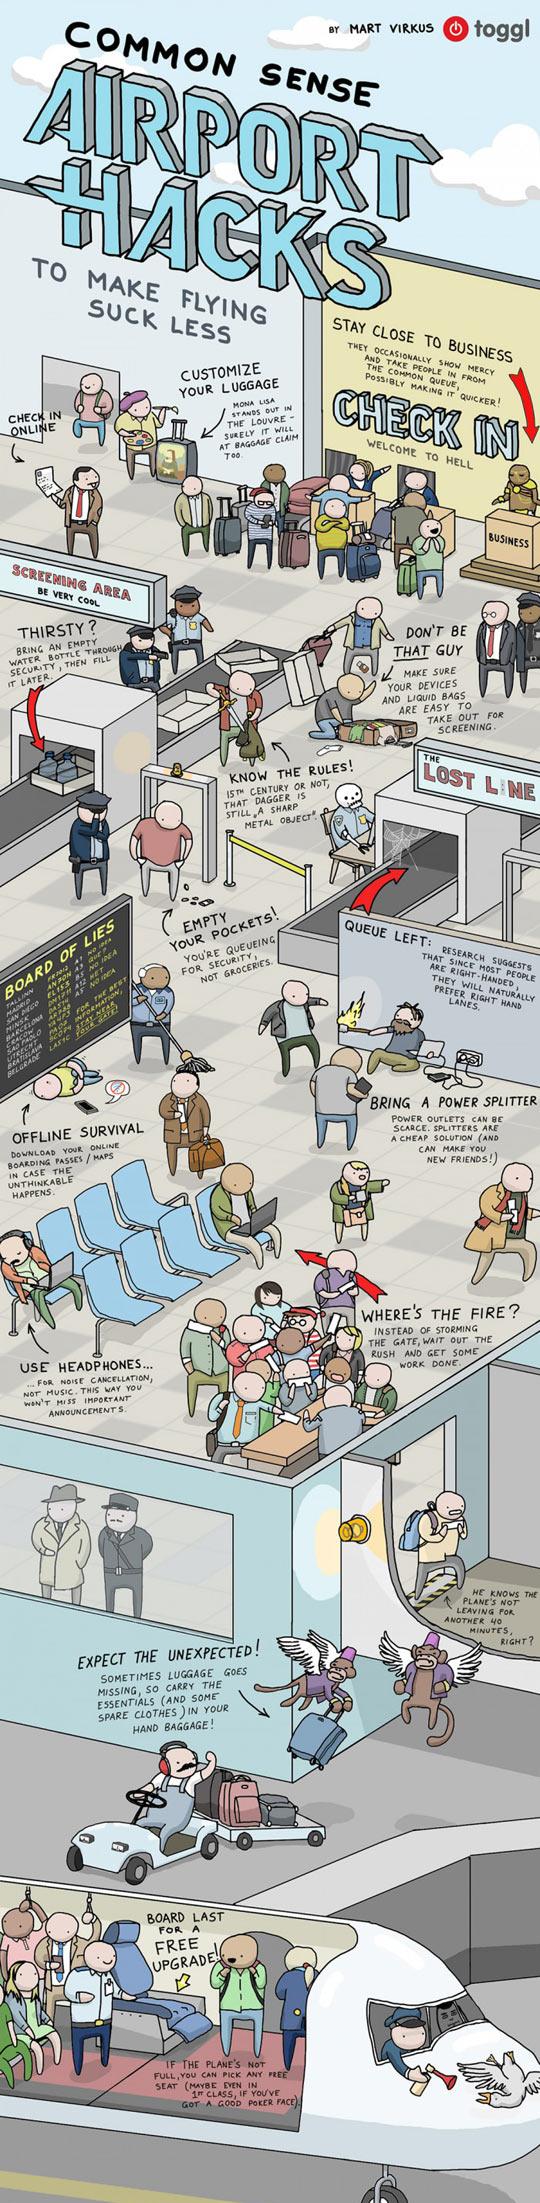 Airport Hacks To Make Flying Suck Less